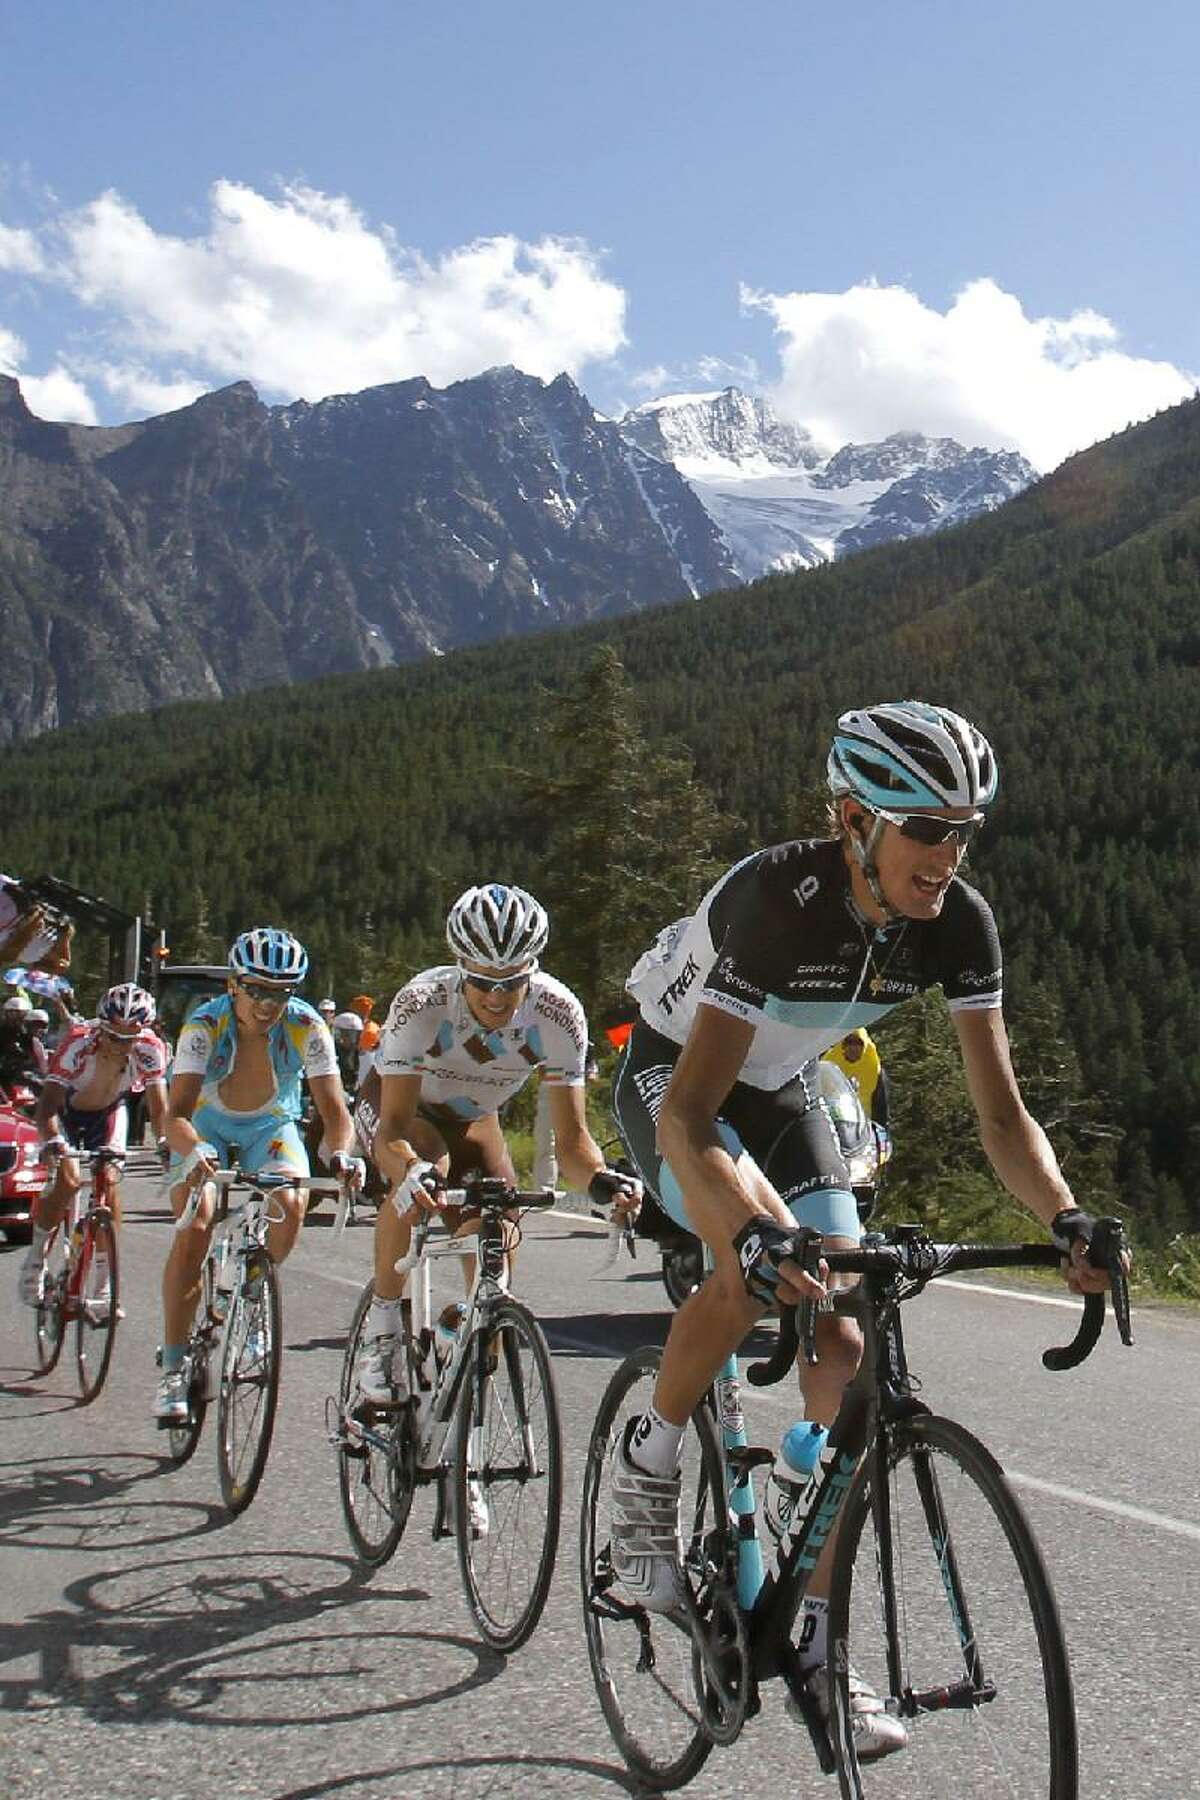 ASSOCIATED PRESS Stage winner Andy Schleck of Luxembourg, leads the breakaway group with Nicolas Roche of Ireland, second, Maxim Iglinskiy of Kazakhstan, third, and Egor Silin of Russia, rear, as they climb Lautaret pass during the 18th stage of the Tour de France cycling race over 200.5 kilometers (124.6 miles) starting in Pinerolo, Italy, and finishing on Galibier pass, Alps region, France, Thursday.